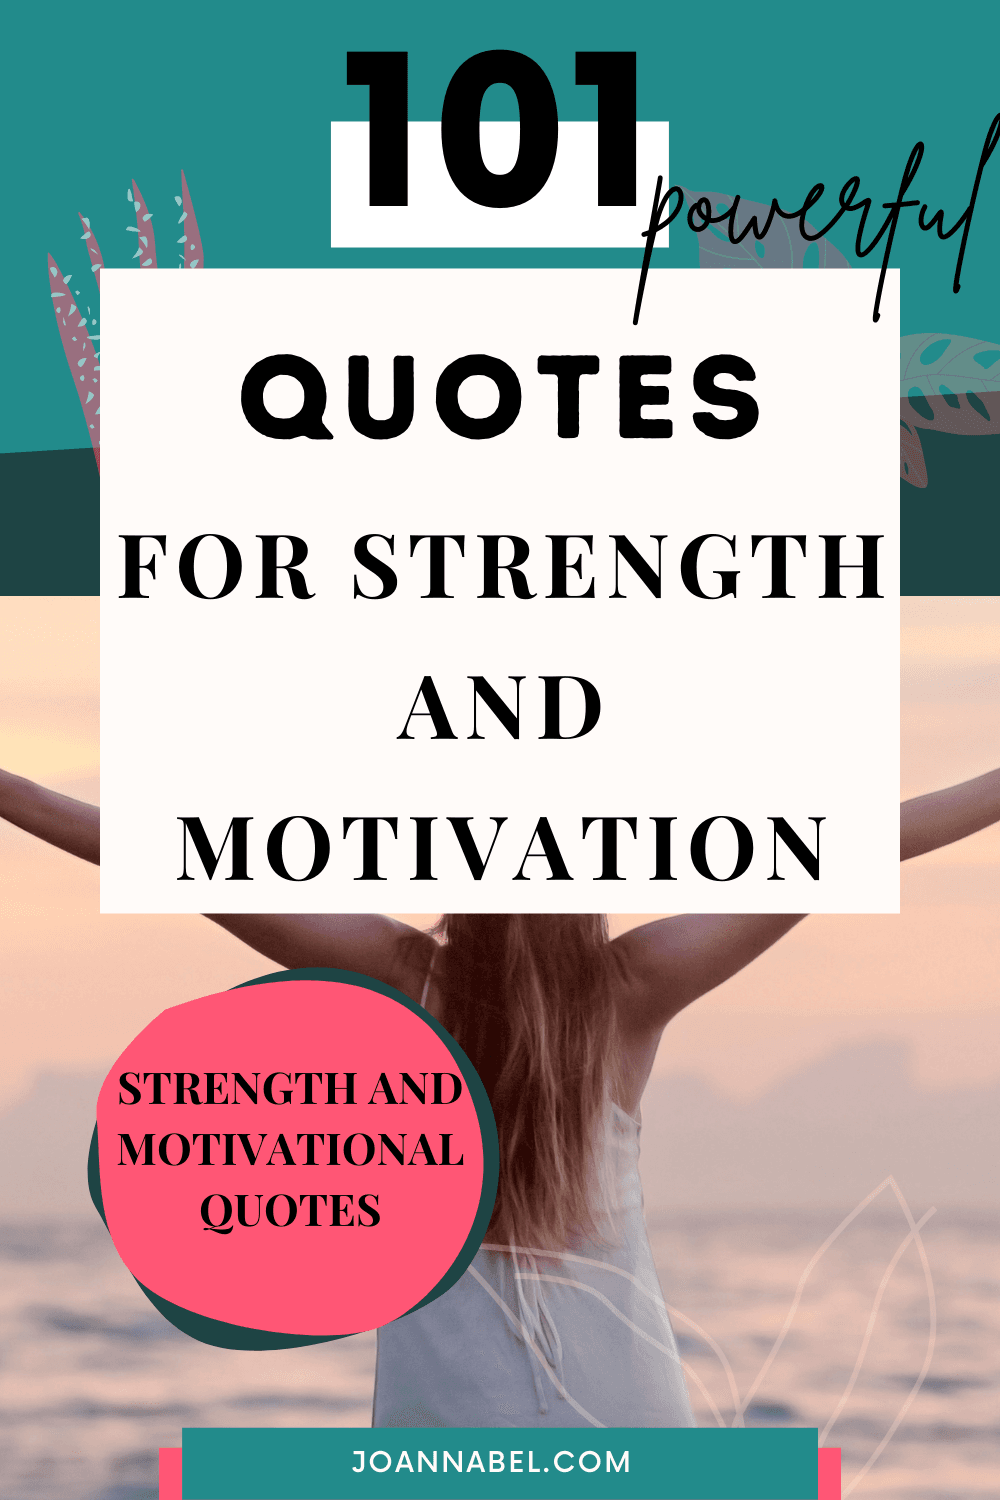 Pin image with text in front - 101 quotes for strength and motivation - and in the background is a woman with her back turned looking at the sea and with spread hands on the side